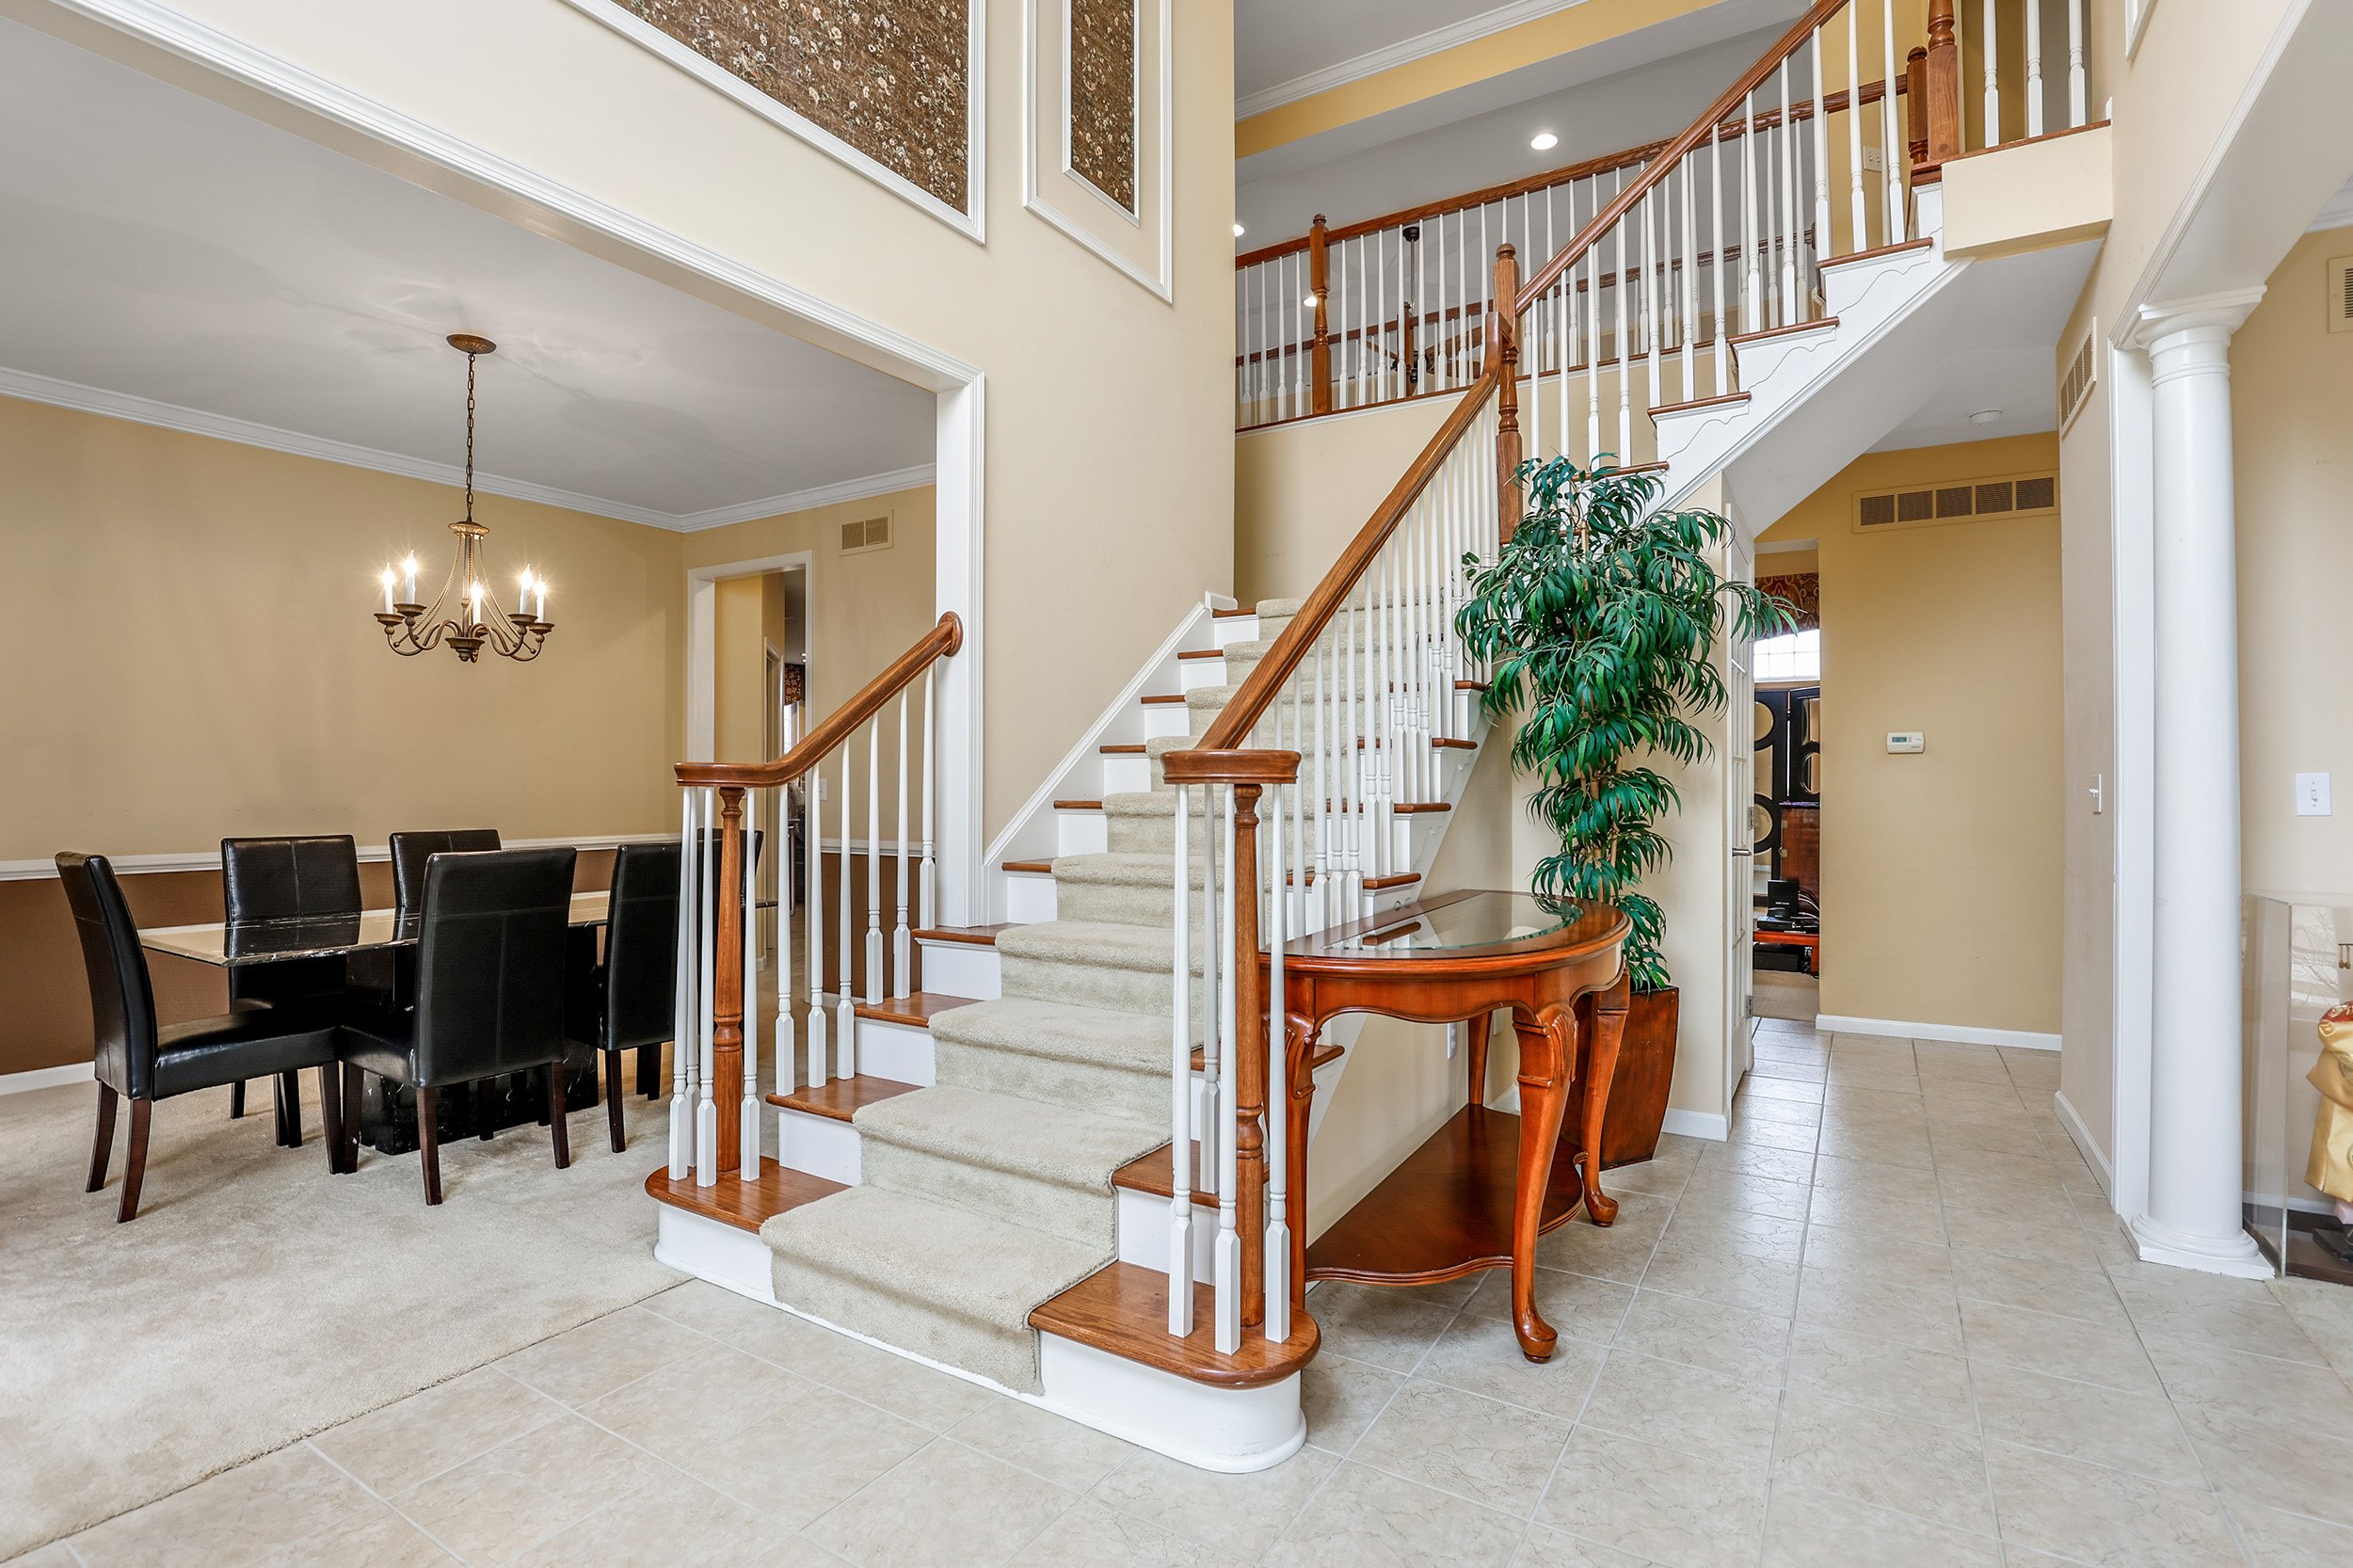  two story foyer - South Lyon Michigan Real Estate Photography   